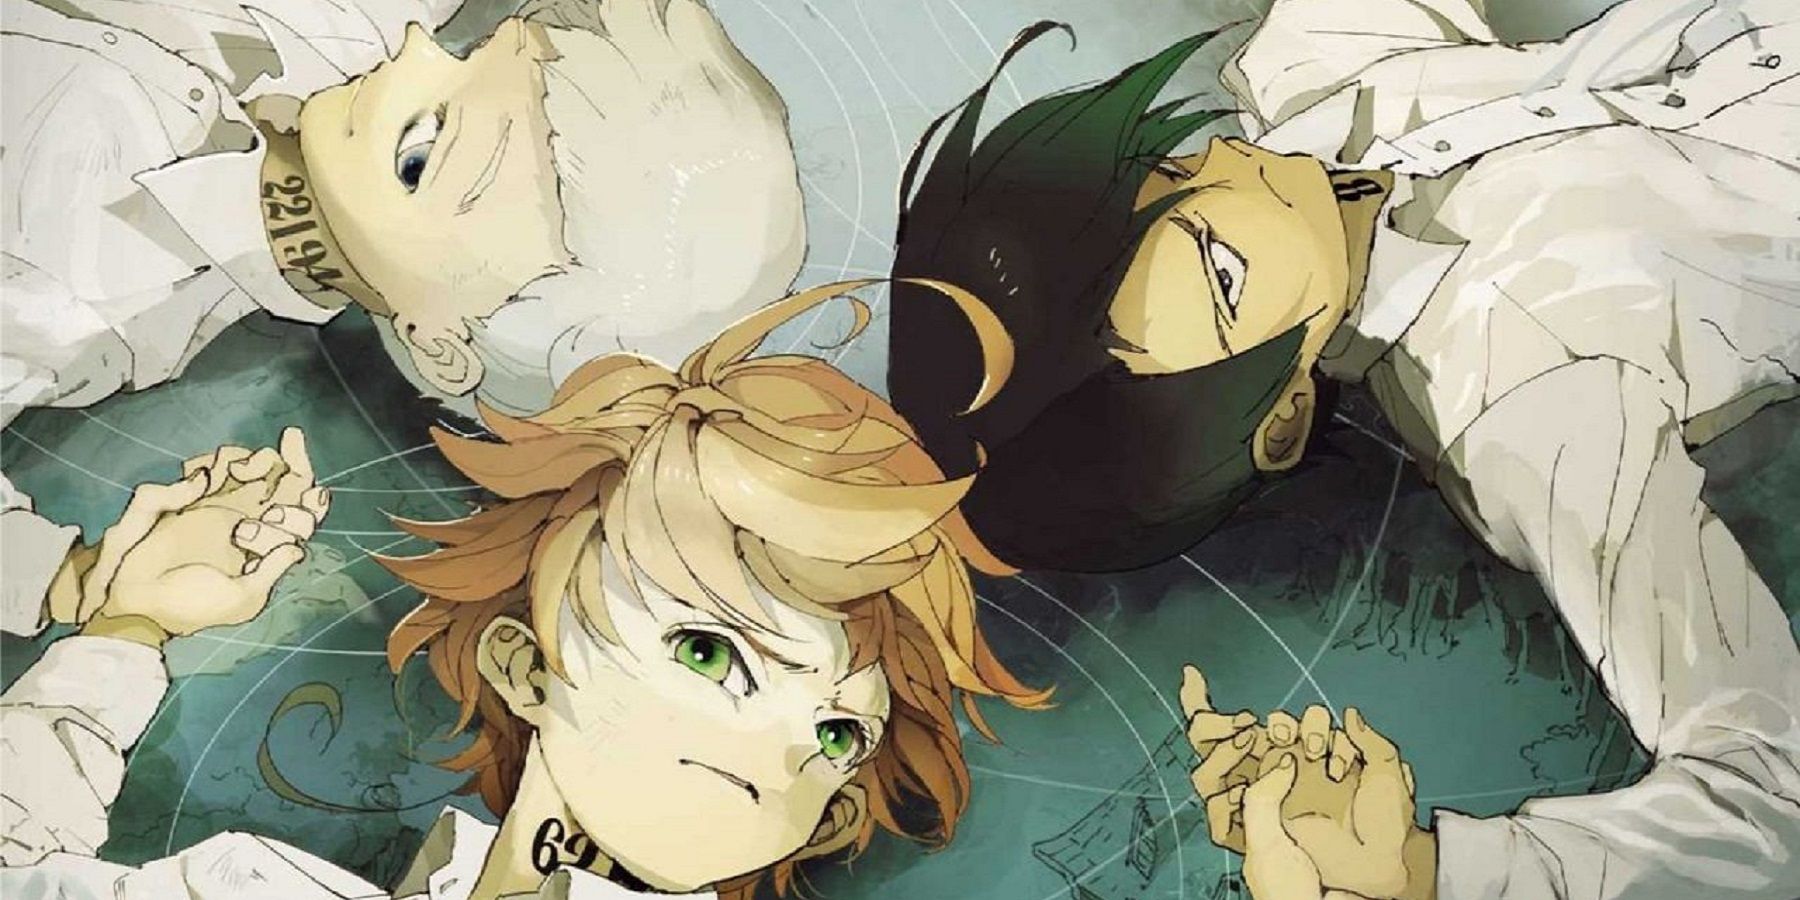 Promised Neverland: Why Was Season 2 Anti-Climactic?